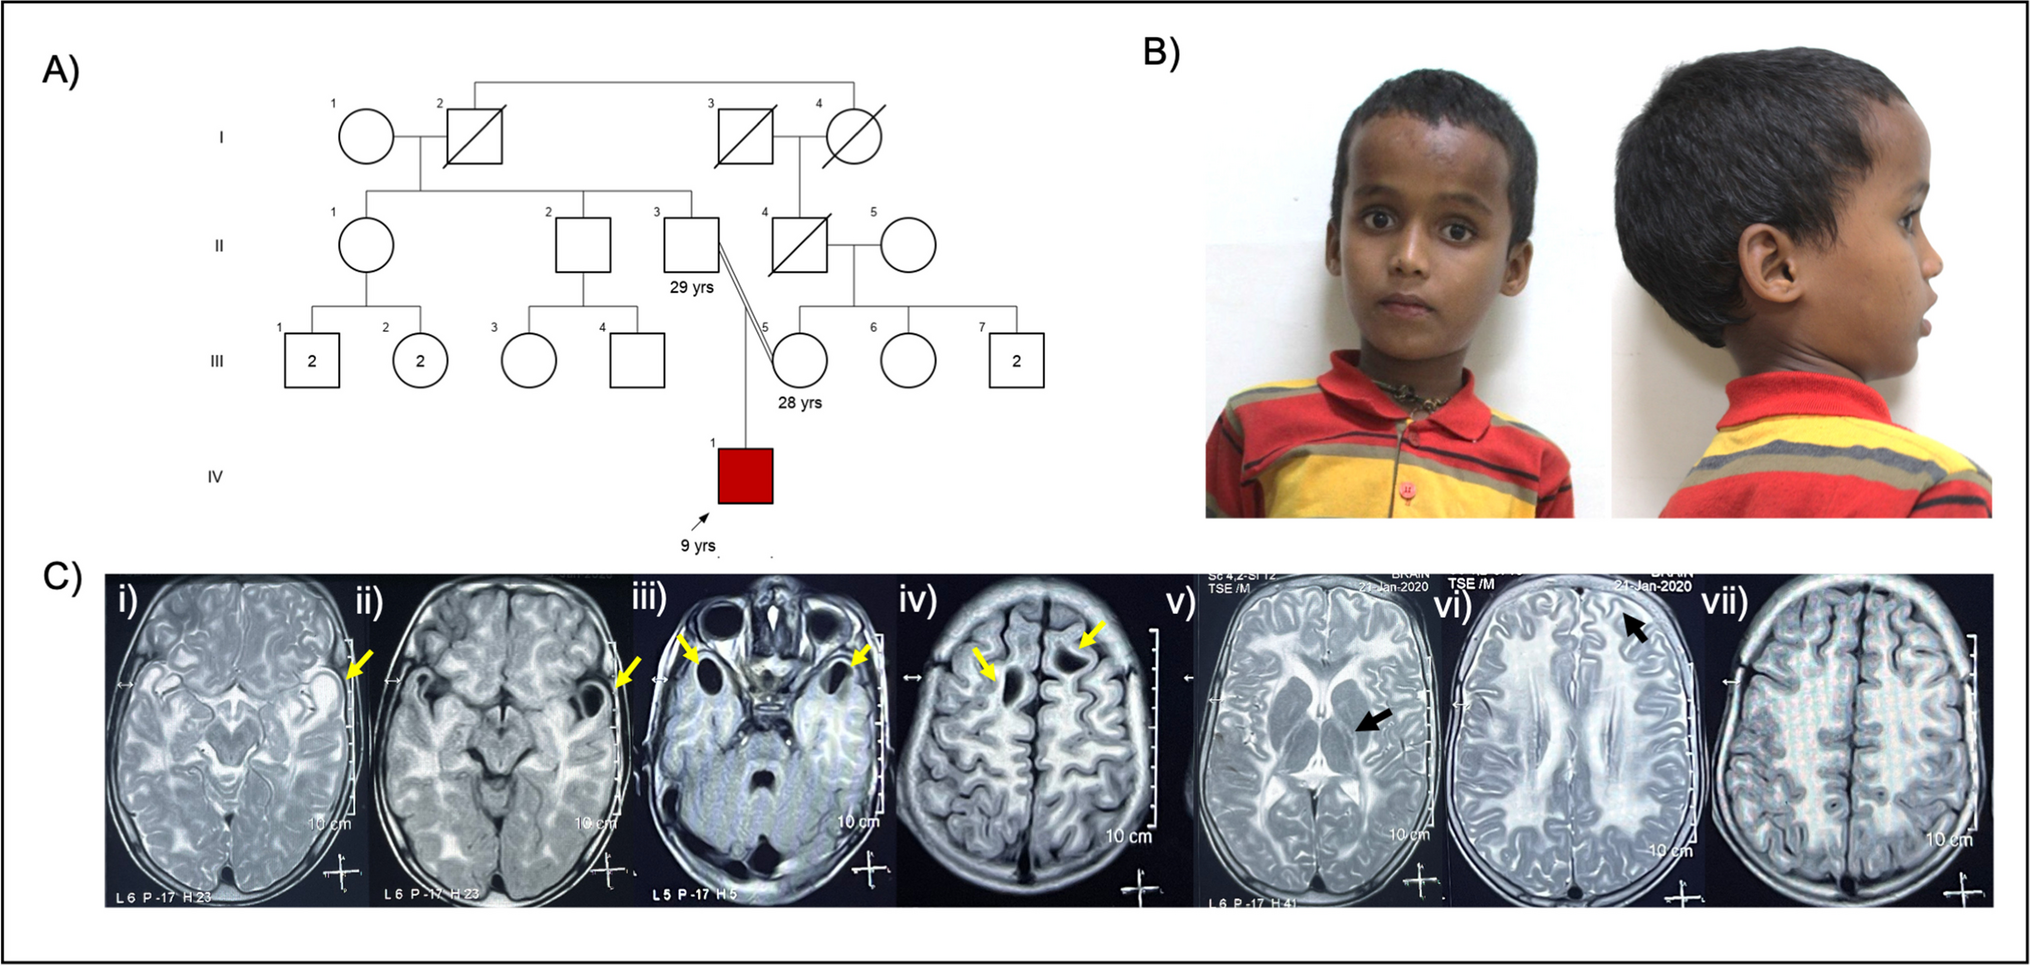 Intragenic homozygous duplication in HEPACAM is associated with megalencephalic leukoencephalopathy with subcortical cysts type 2A